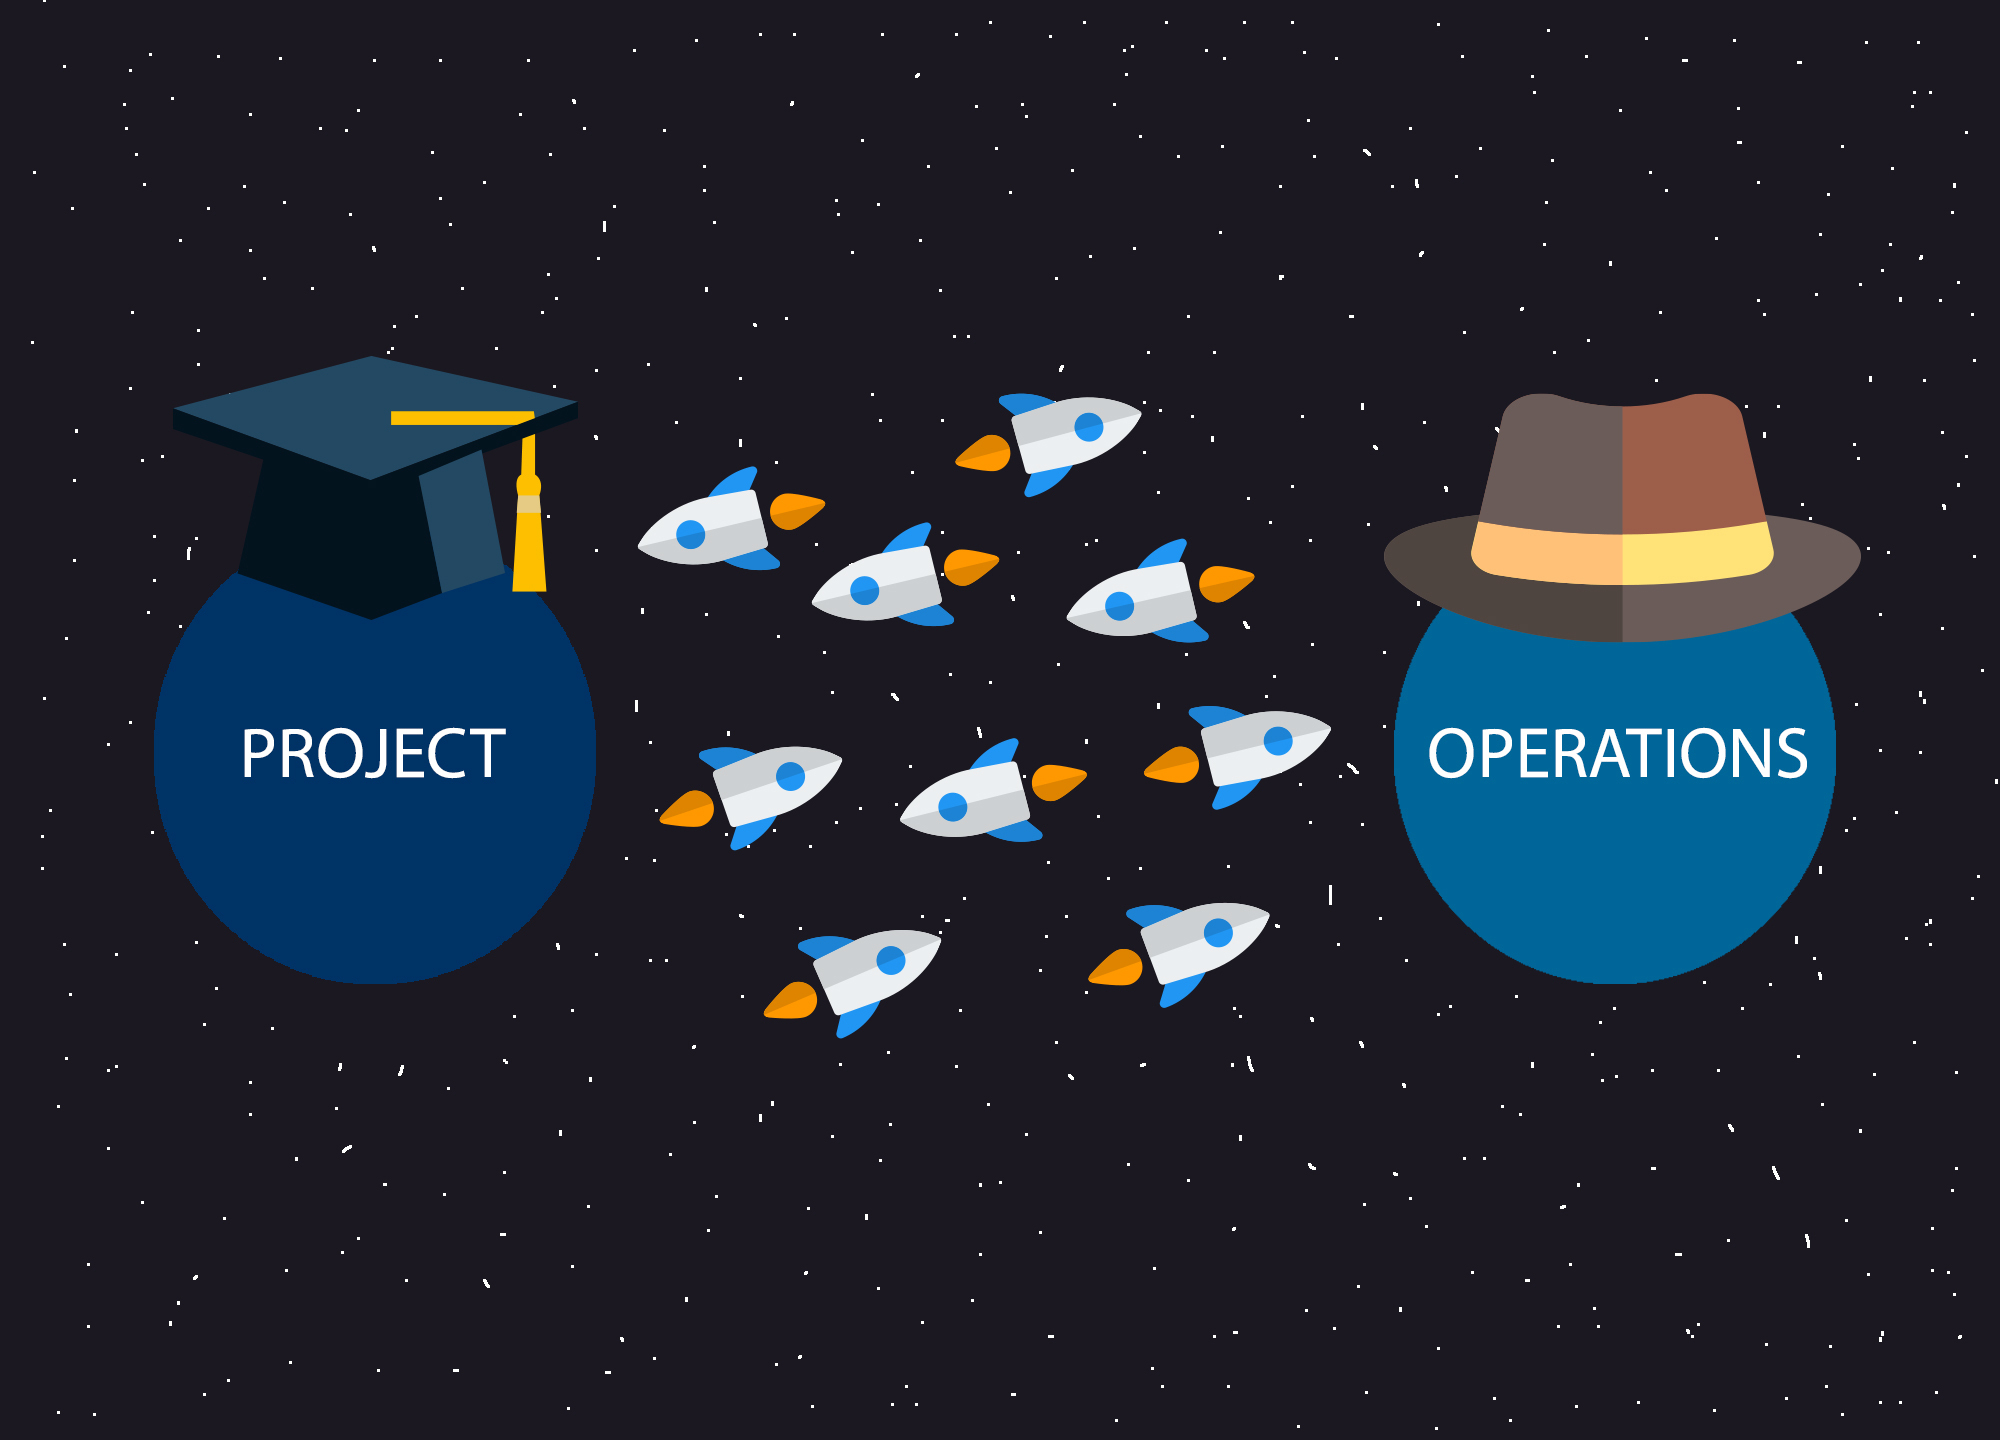 How do Operations Management similar or differ to Project Management?